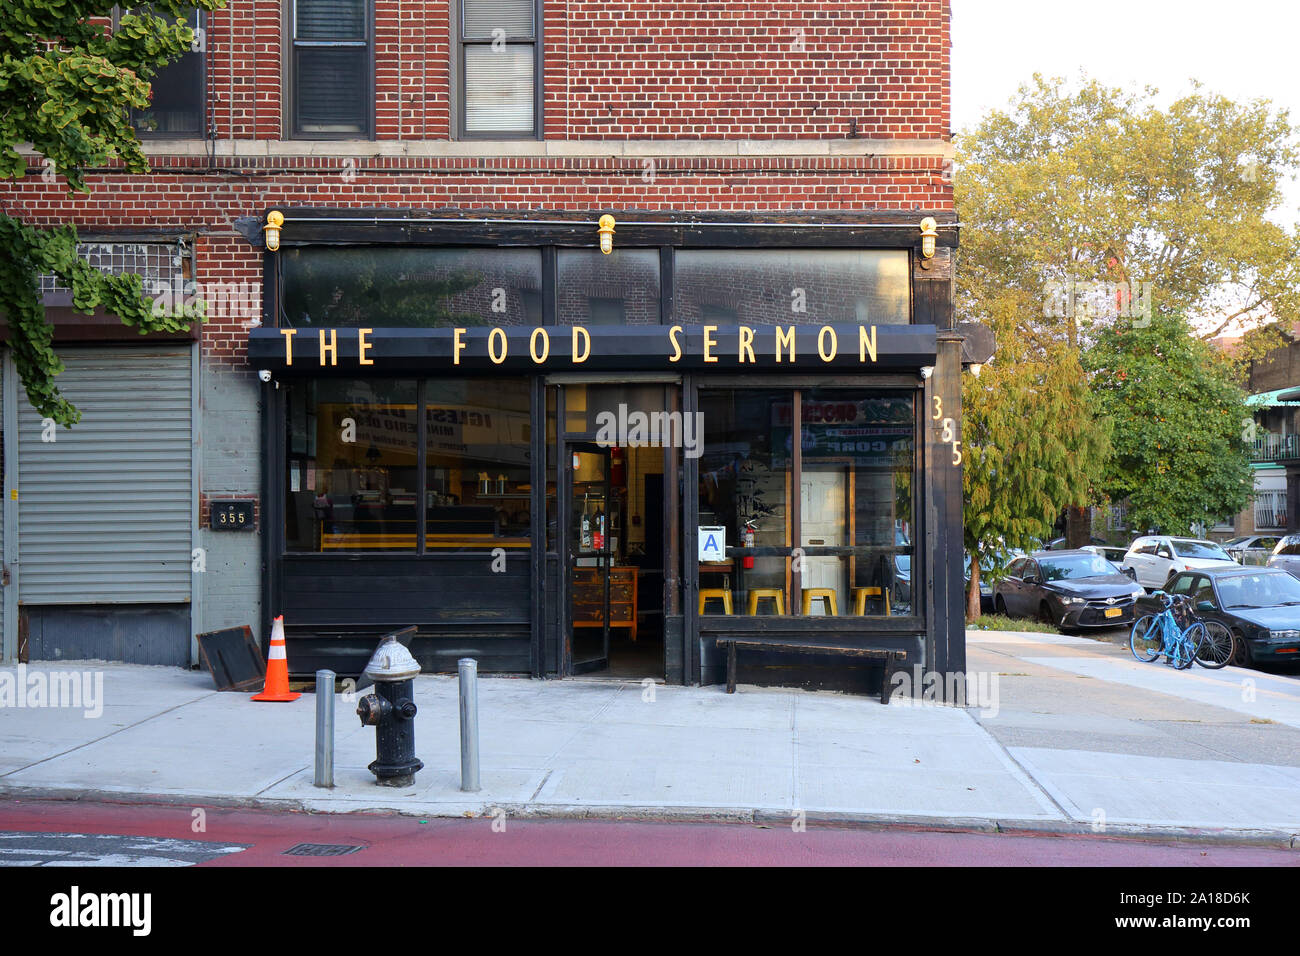 The Food Sermon, 355 Rogers Ave, Brooklyn, NY. exterior storefront of an eatery in crown heights. Stock Photo